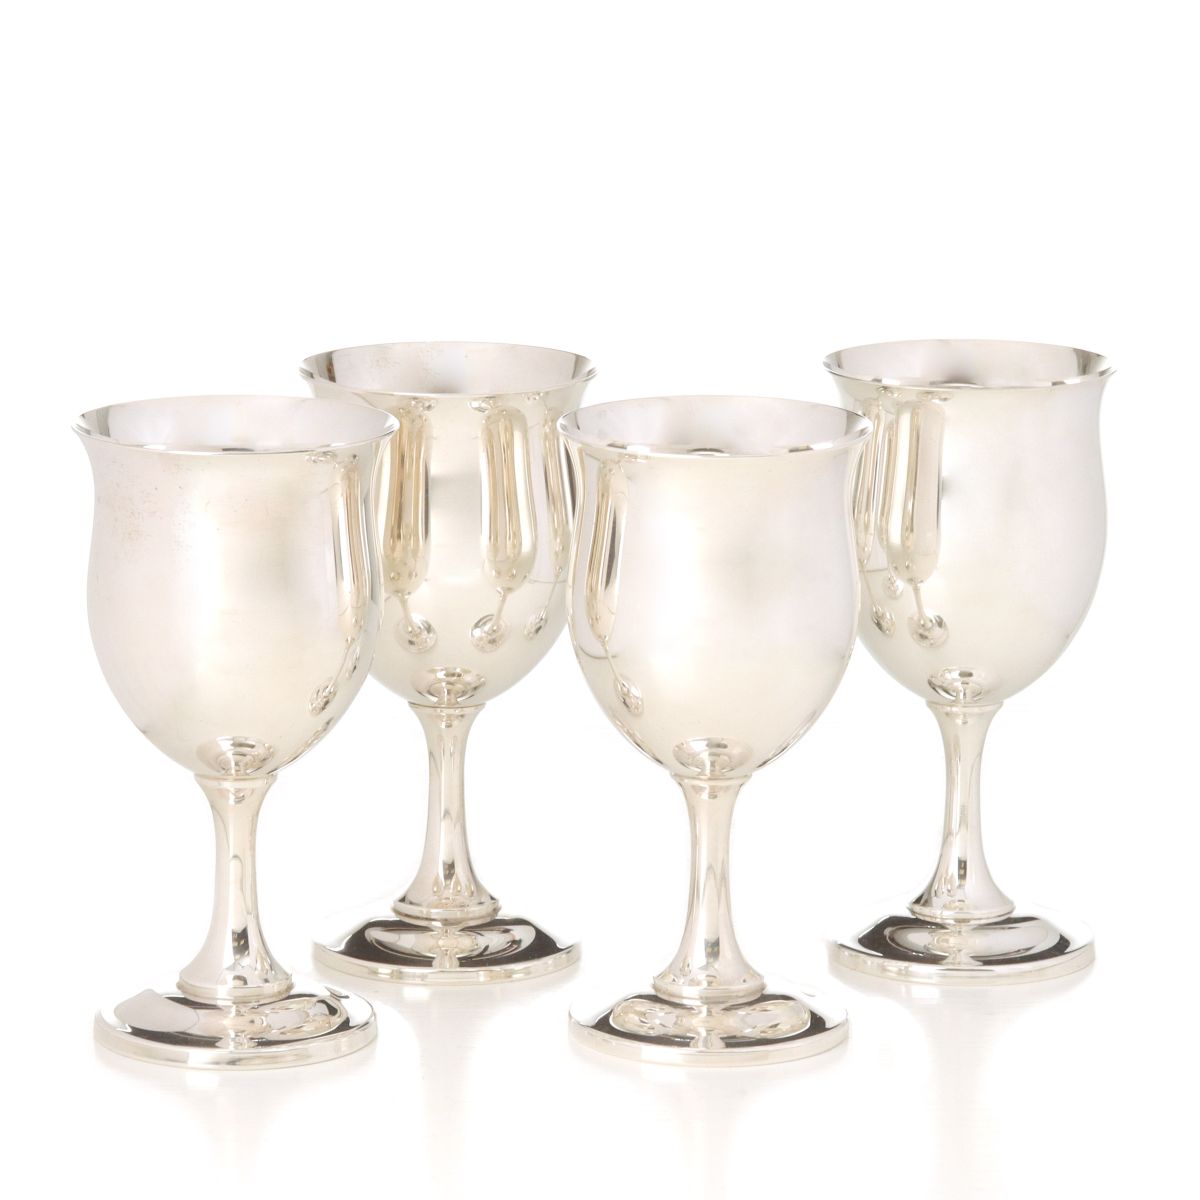 FOUR REED AND BARTON STERLING SILVER GOBLETS